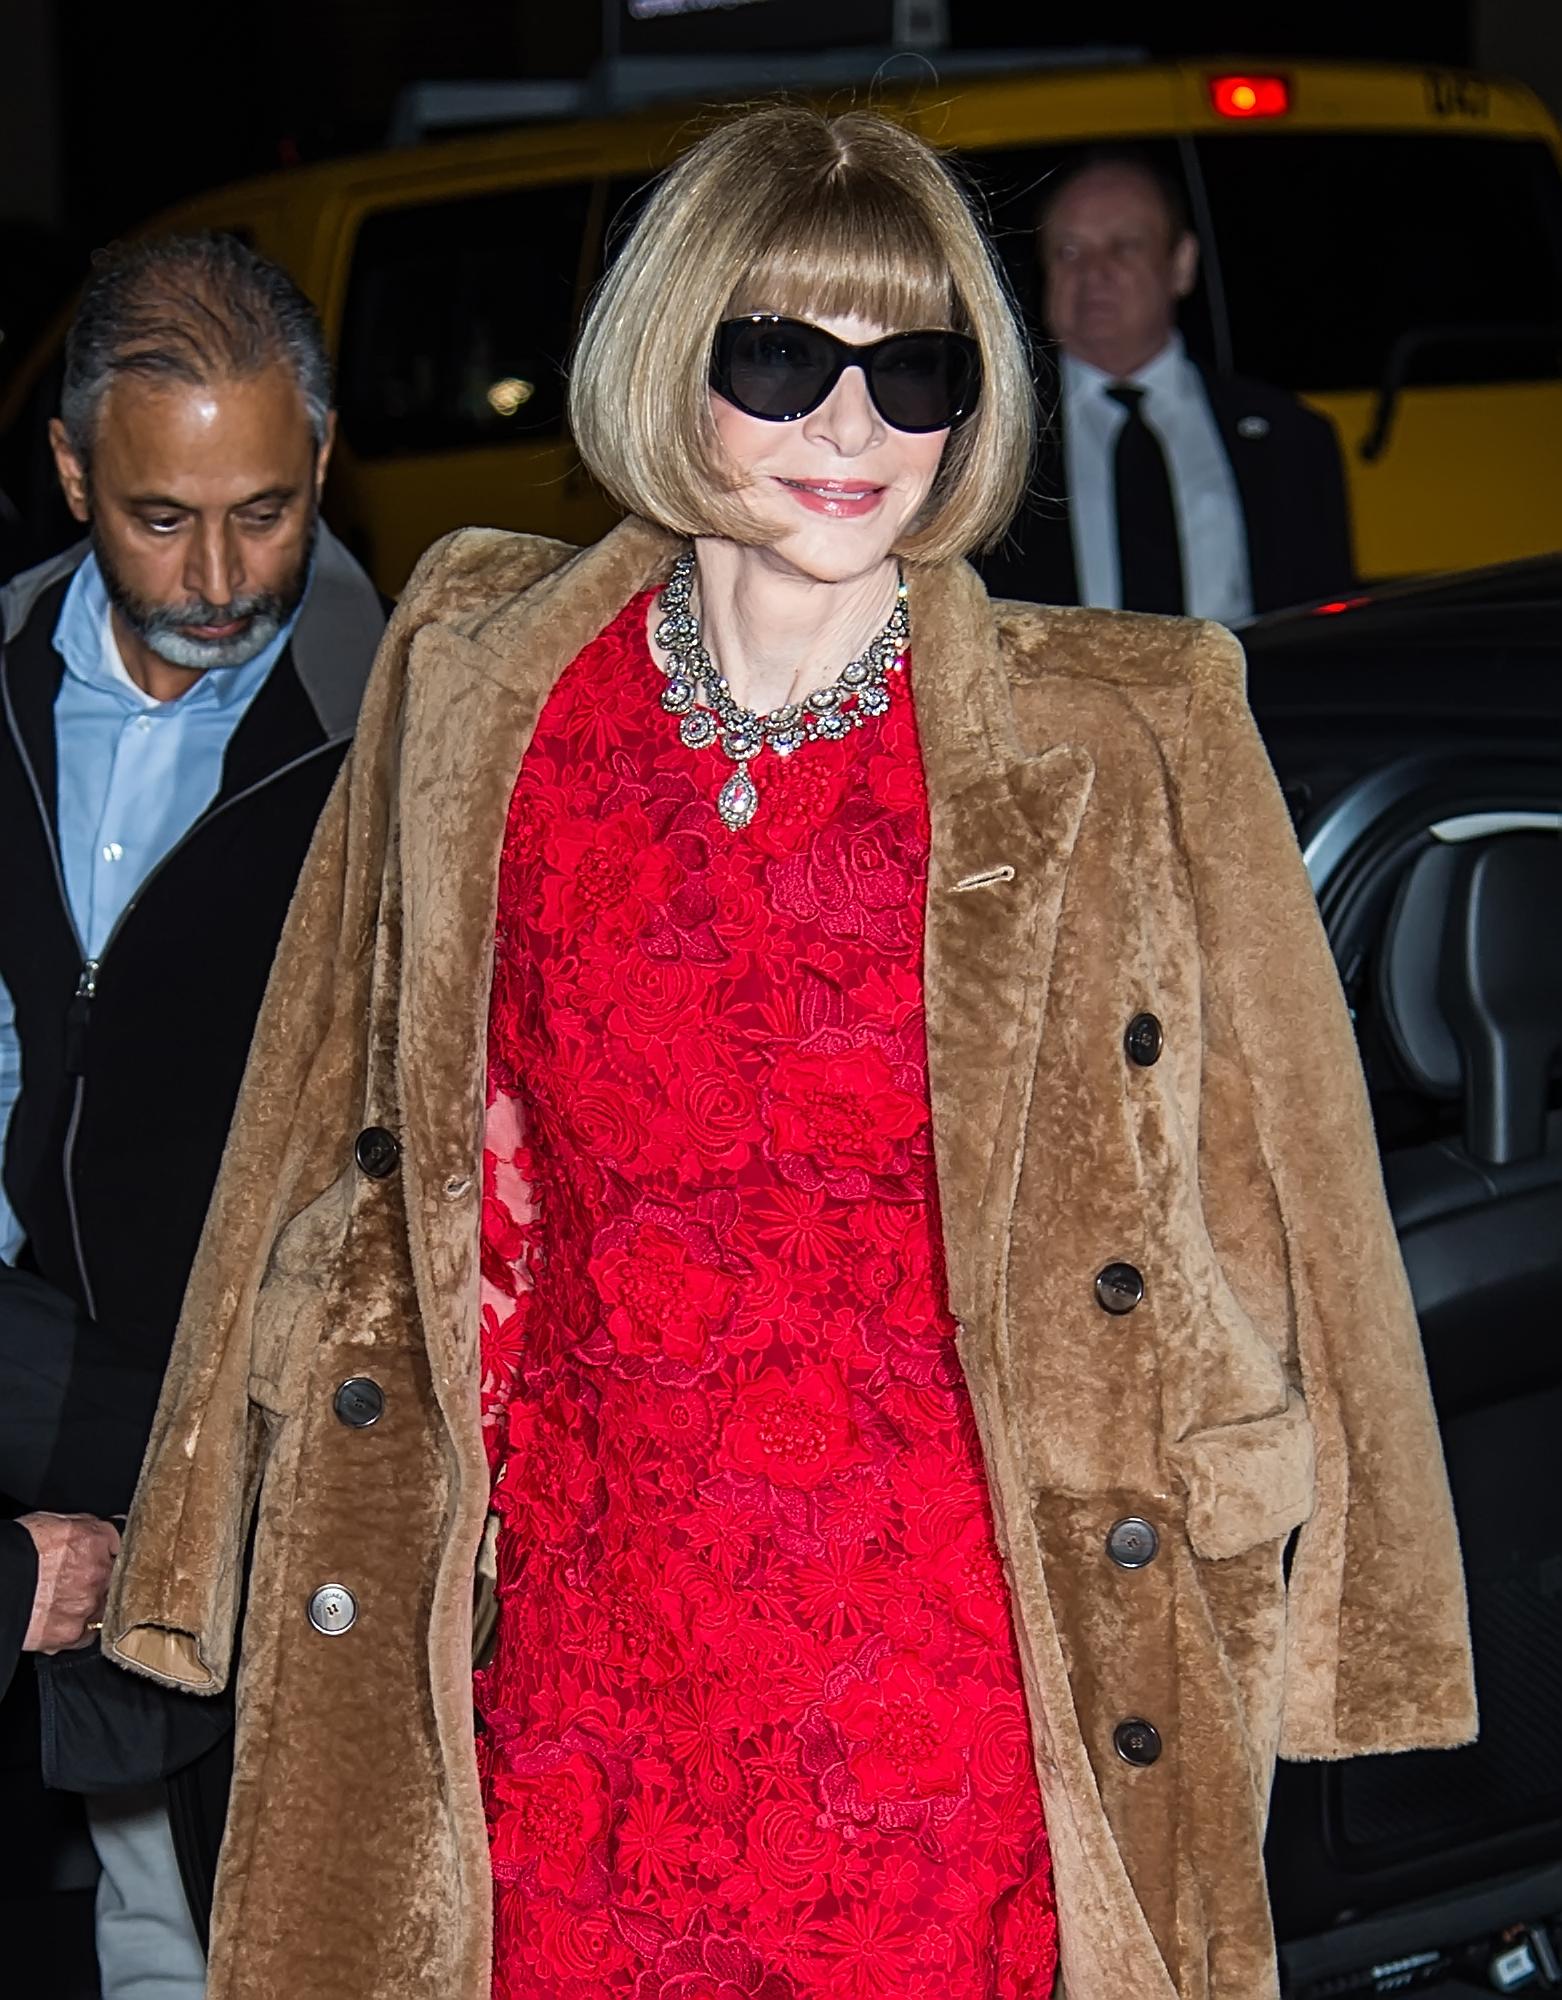 Anna Wintour at 2021 CFDA Fashion Awards in New York City